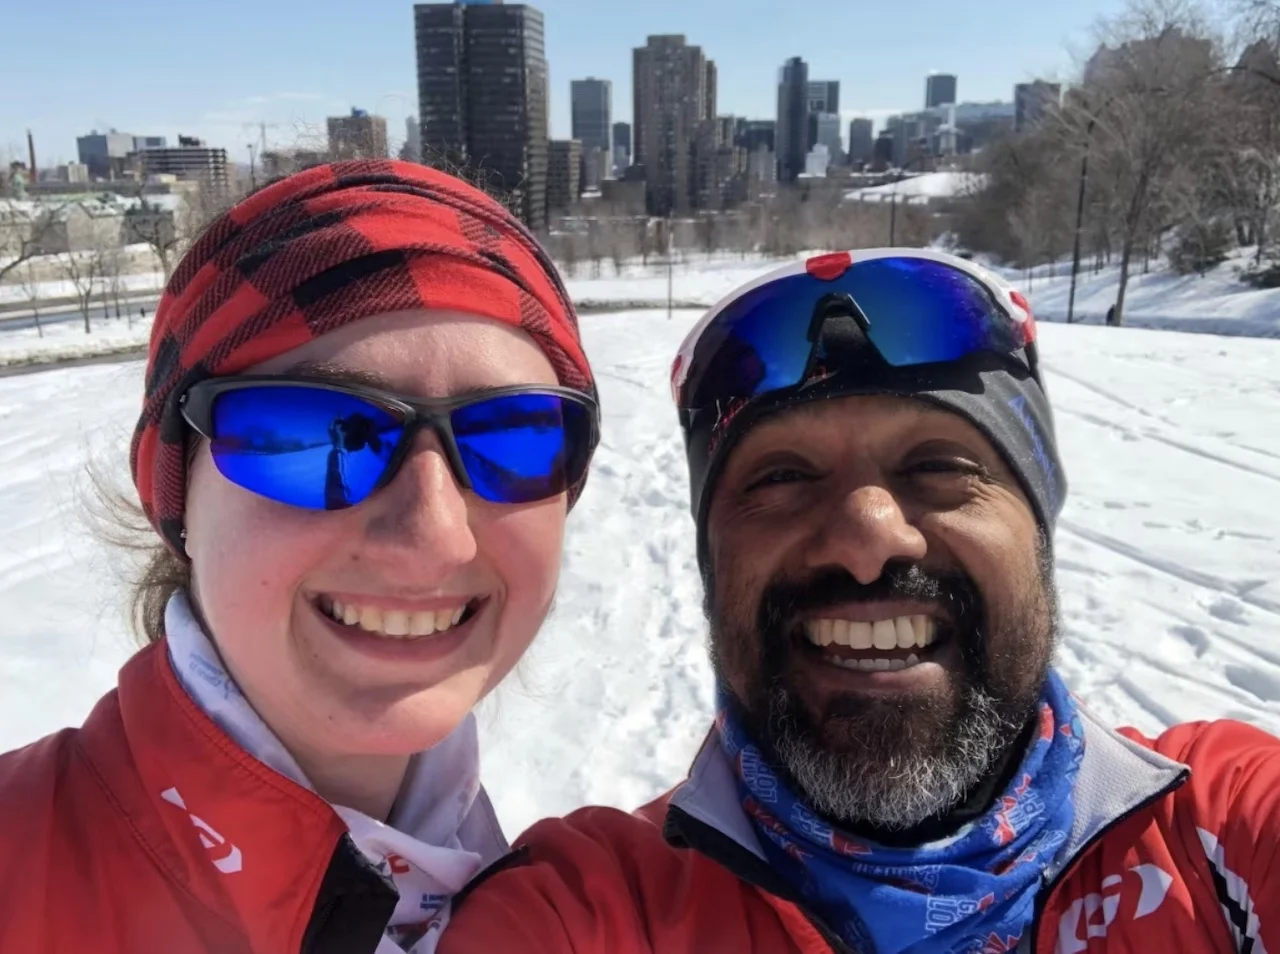 Quebec skiing/Submitted by Ranjan Roy via CBC